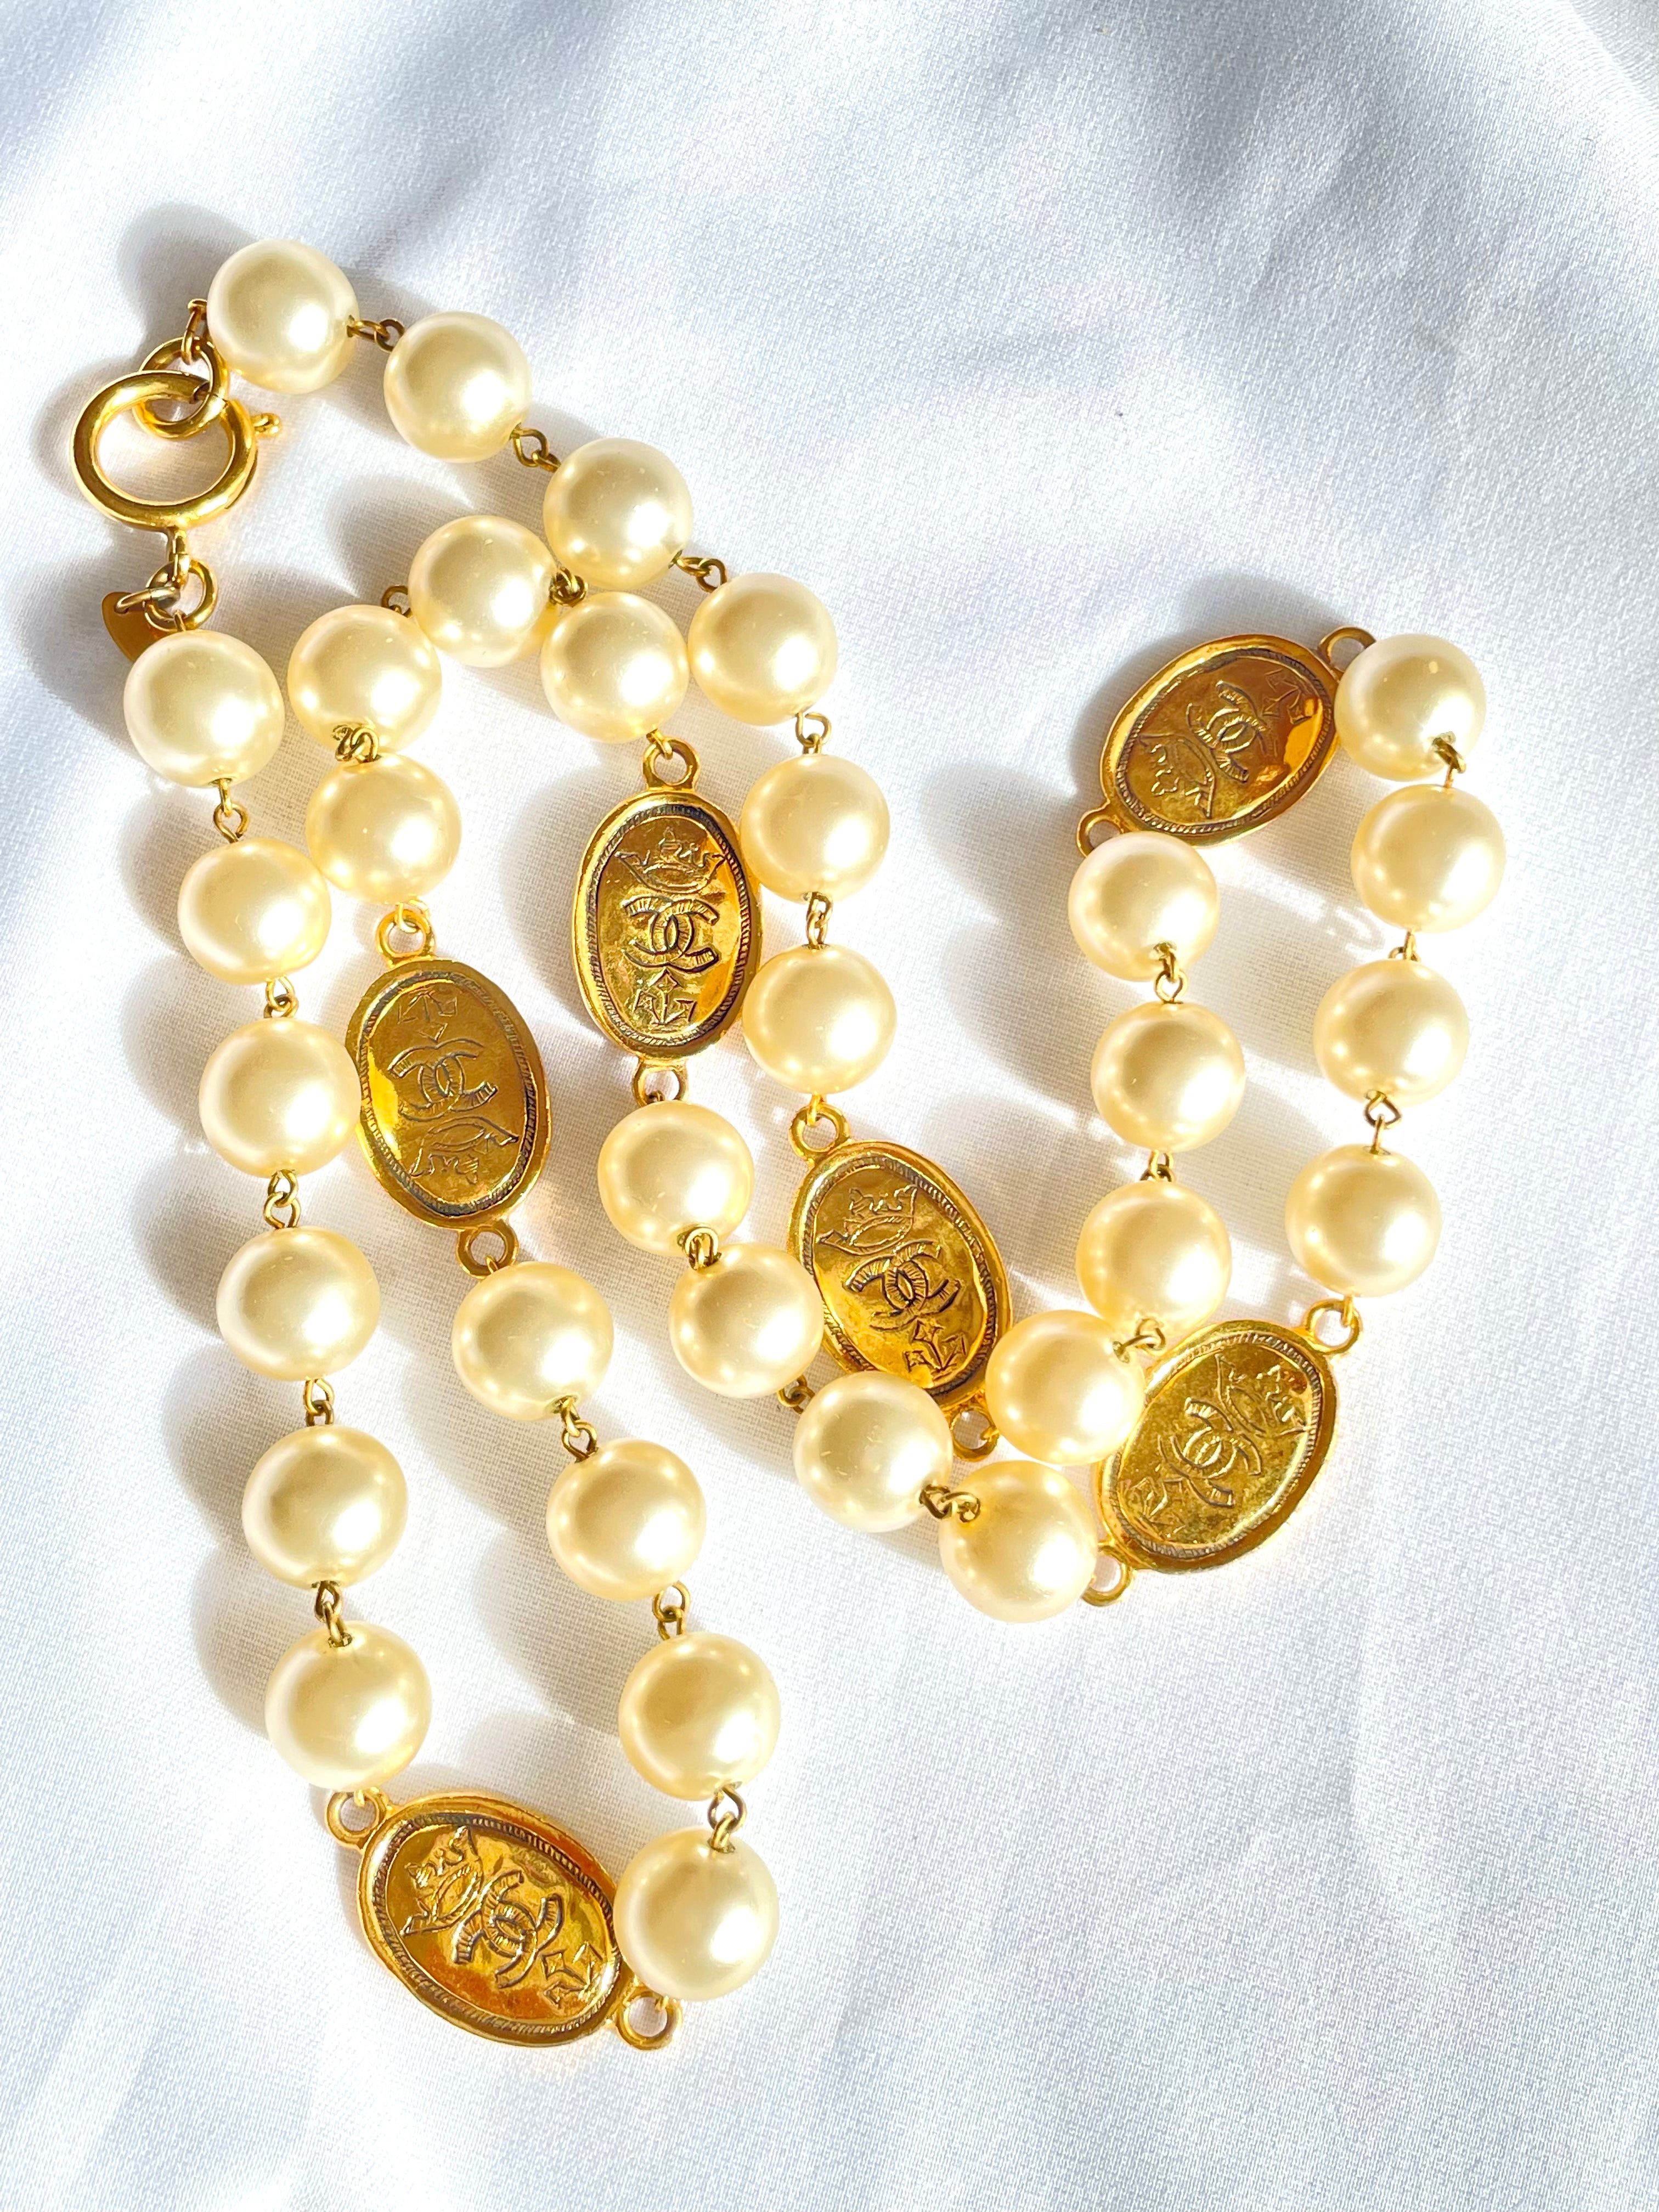 Vintage CHANEL classic faux pearl necklace with oval CC coin